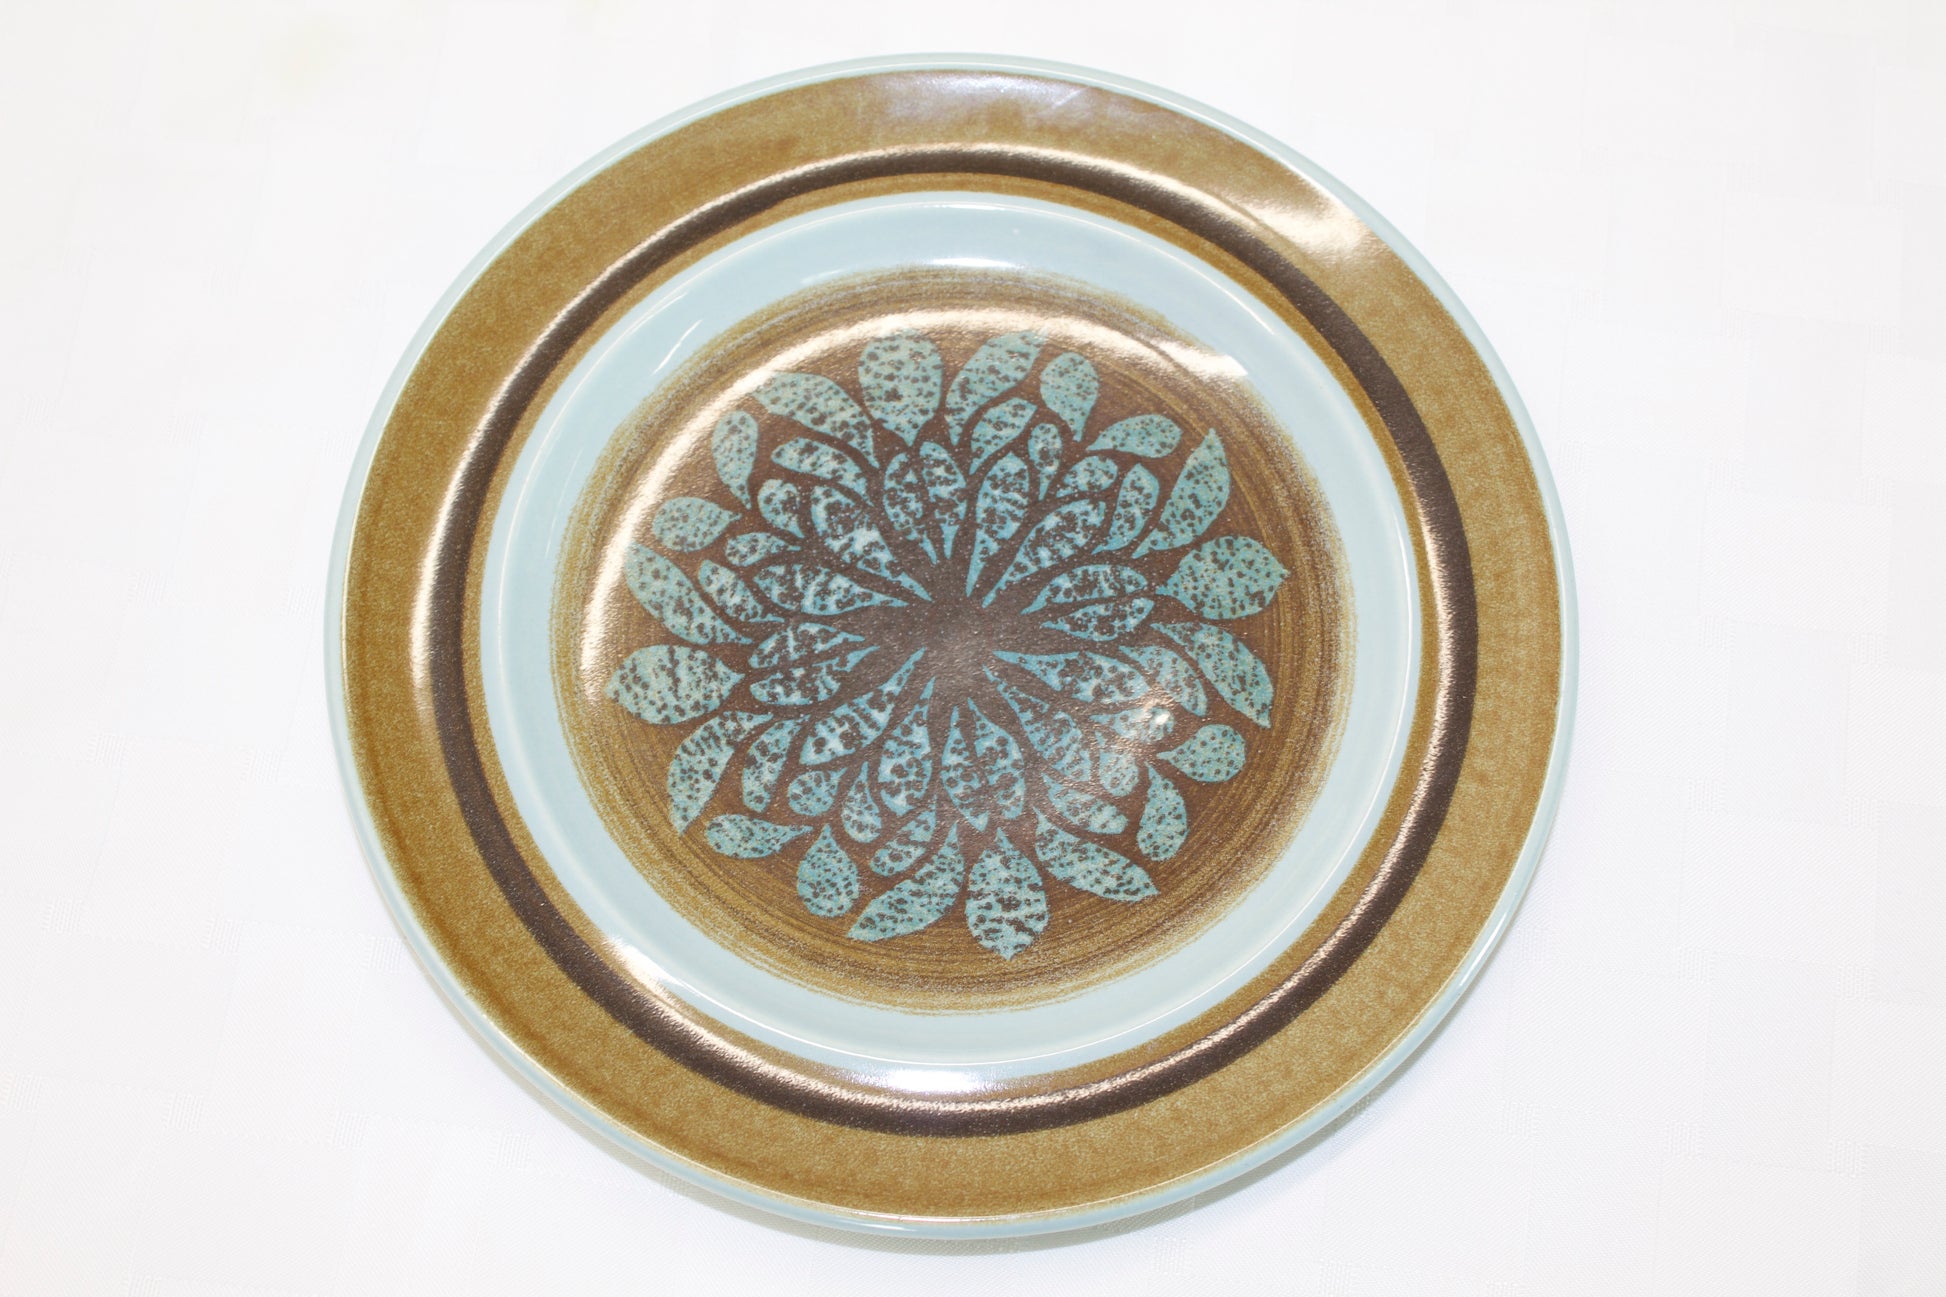 Franciscan Stoneware brown and teal in color with a leaf design 